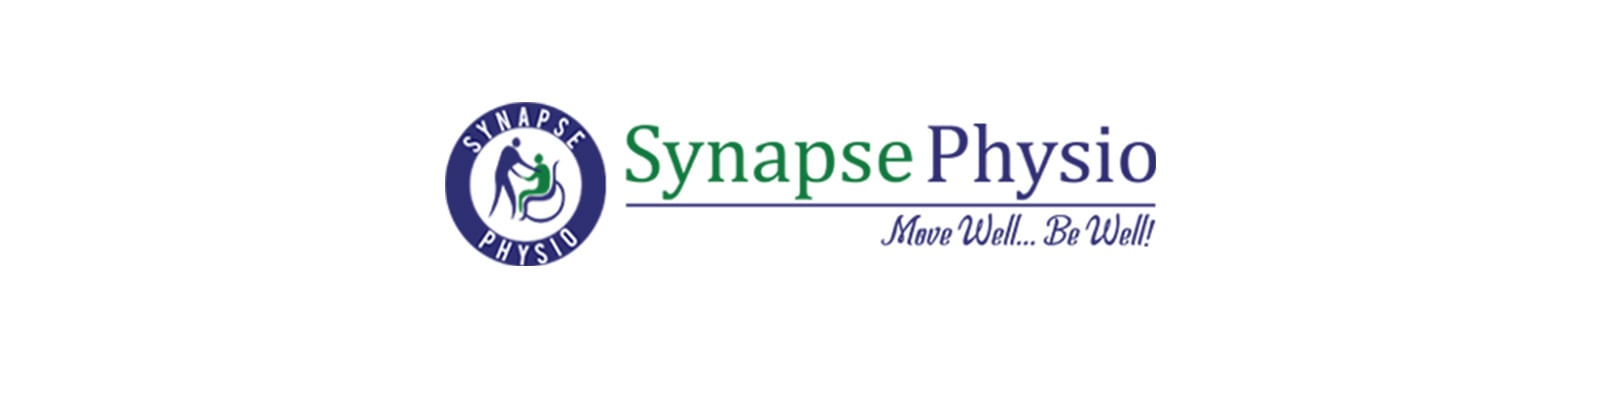 Synapse Physio At Healing Touch Multi Speciality Hospital Ambala